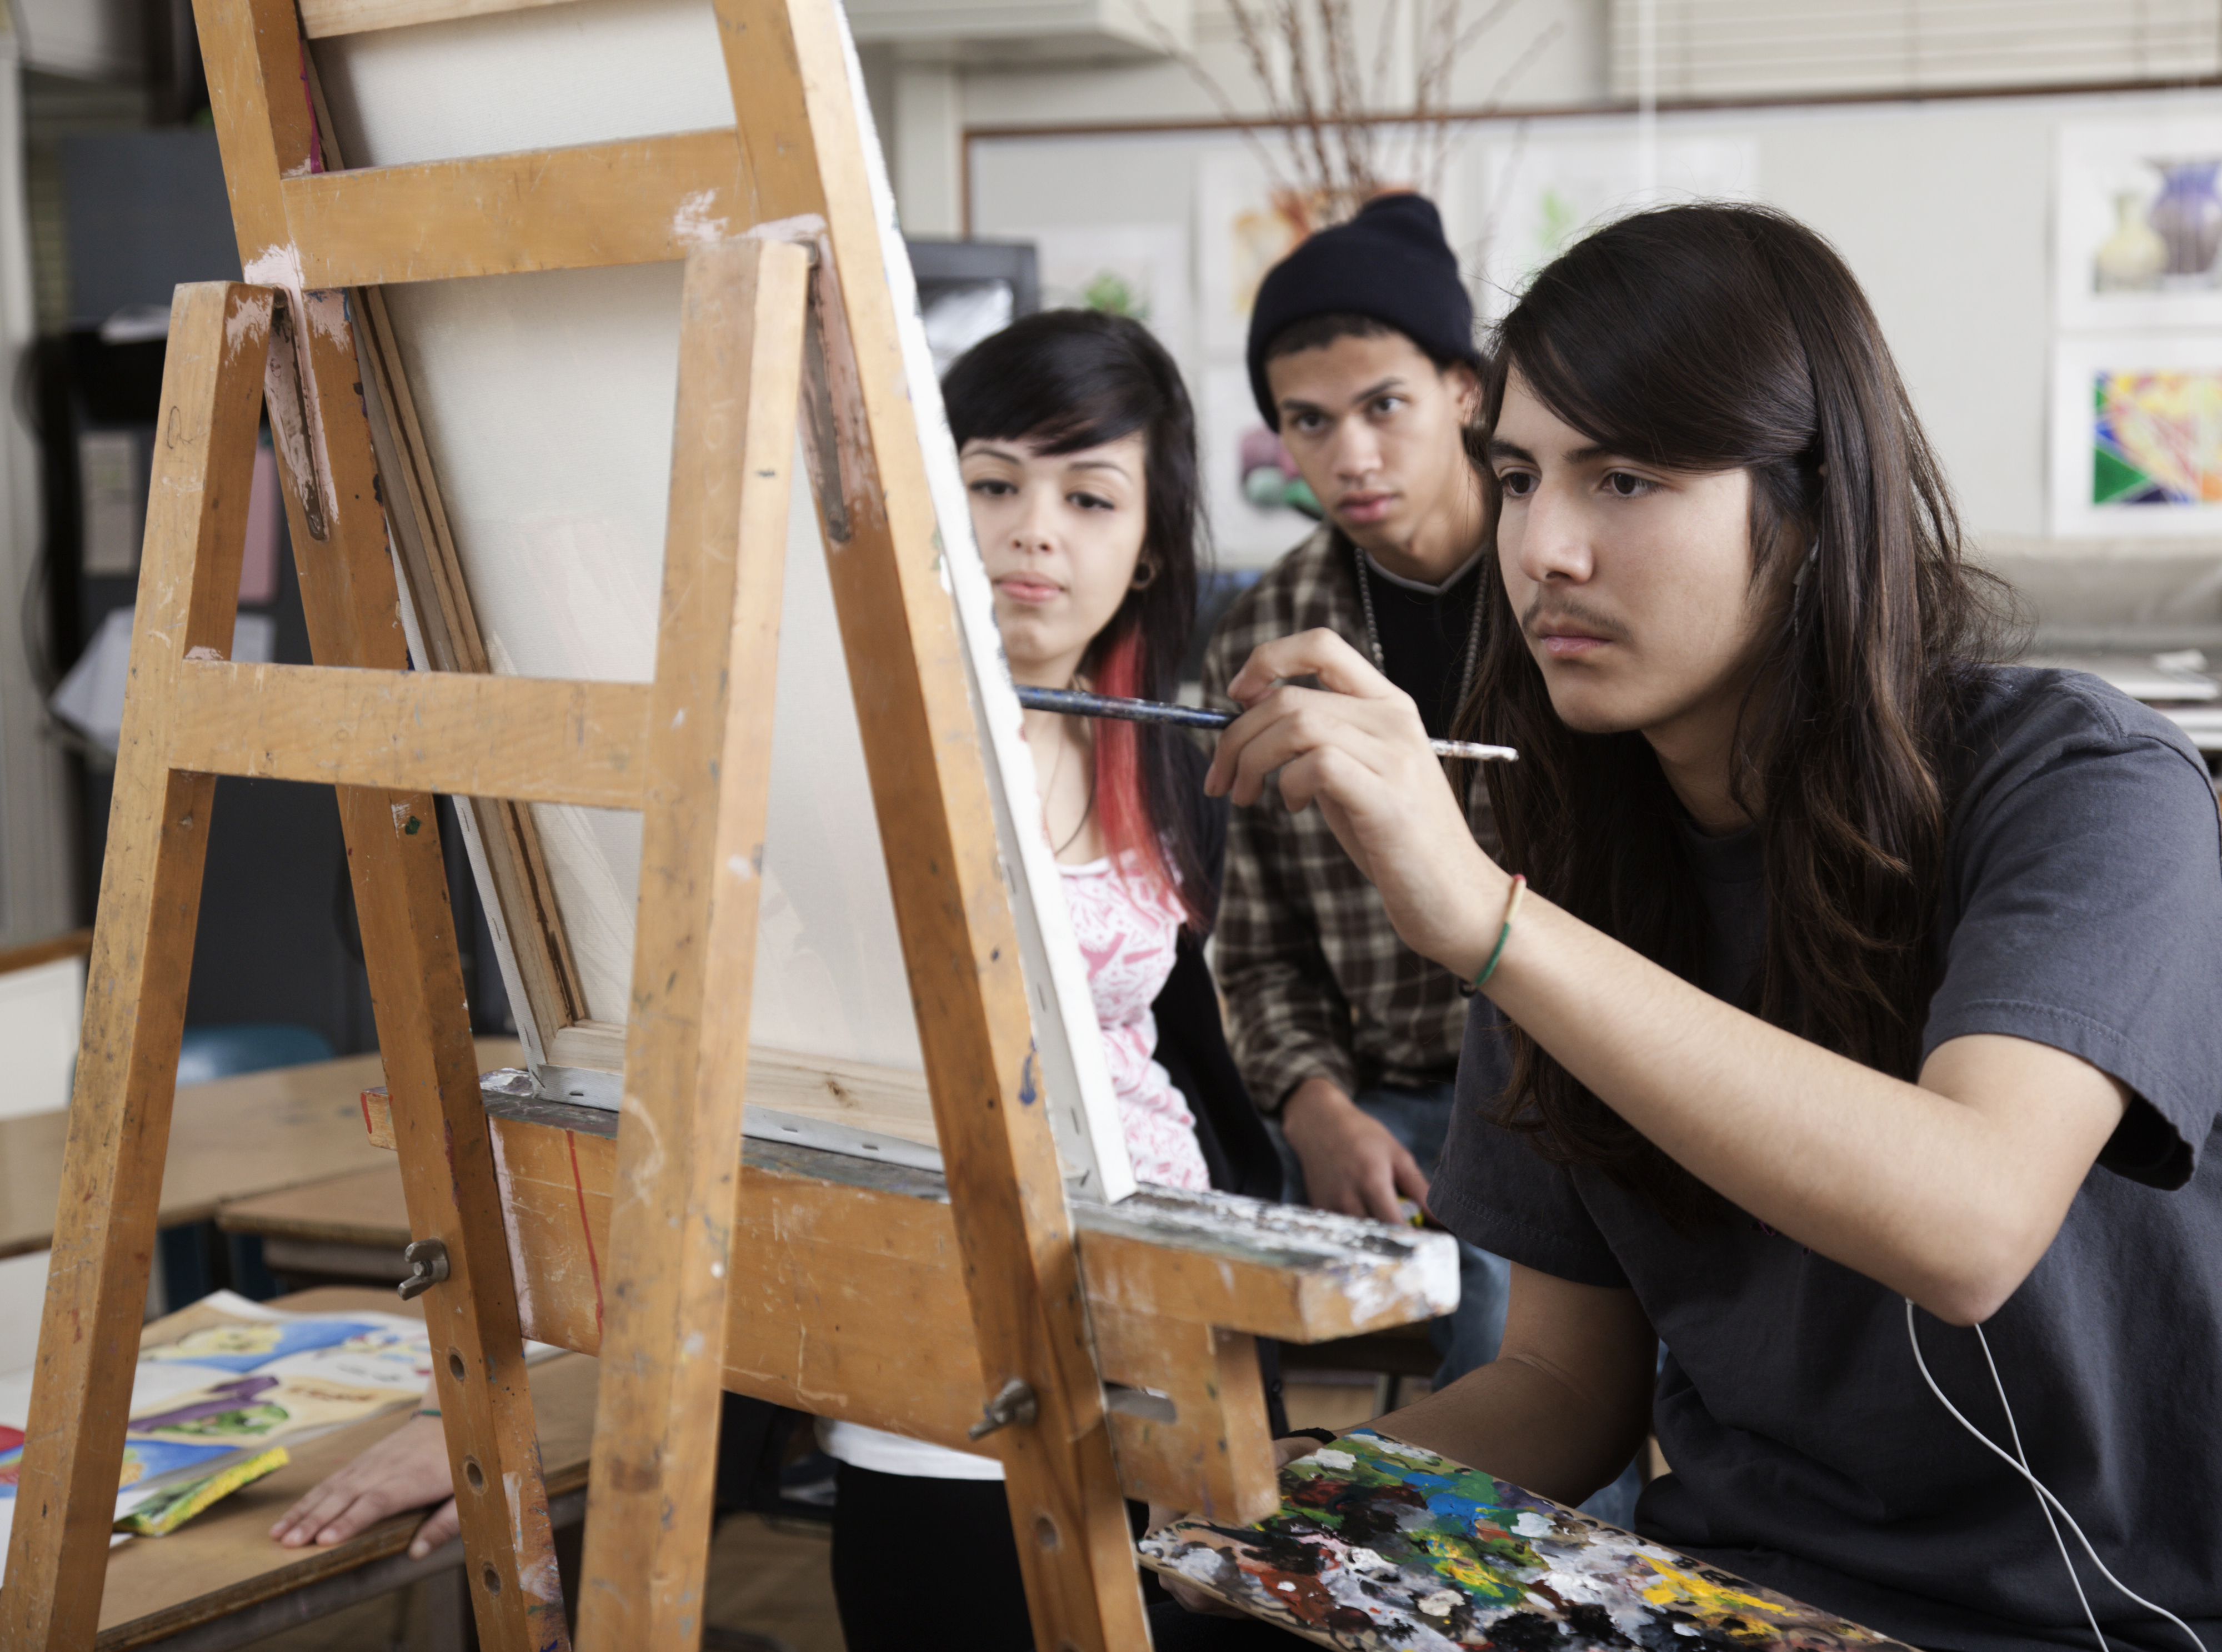 Three artists focus intently on painting at easels in an art studio